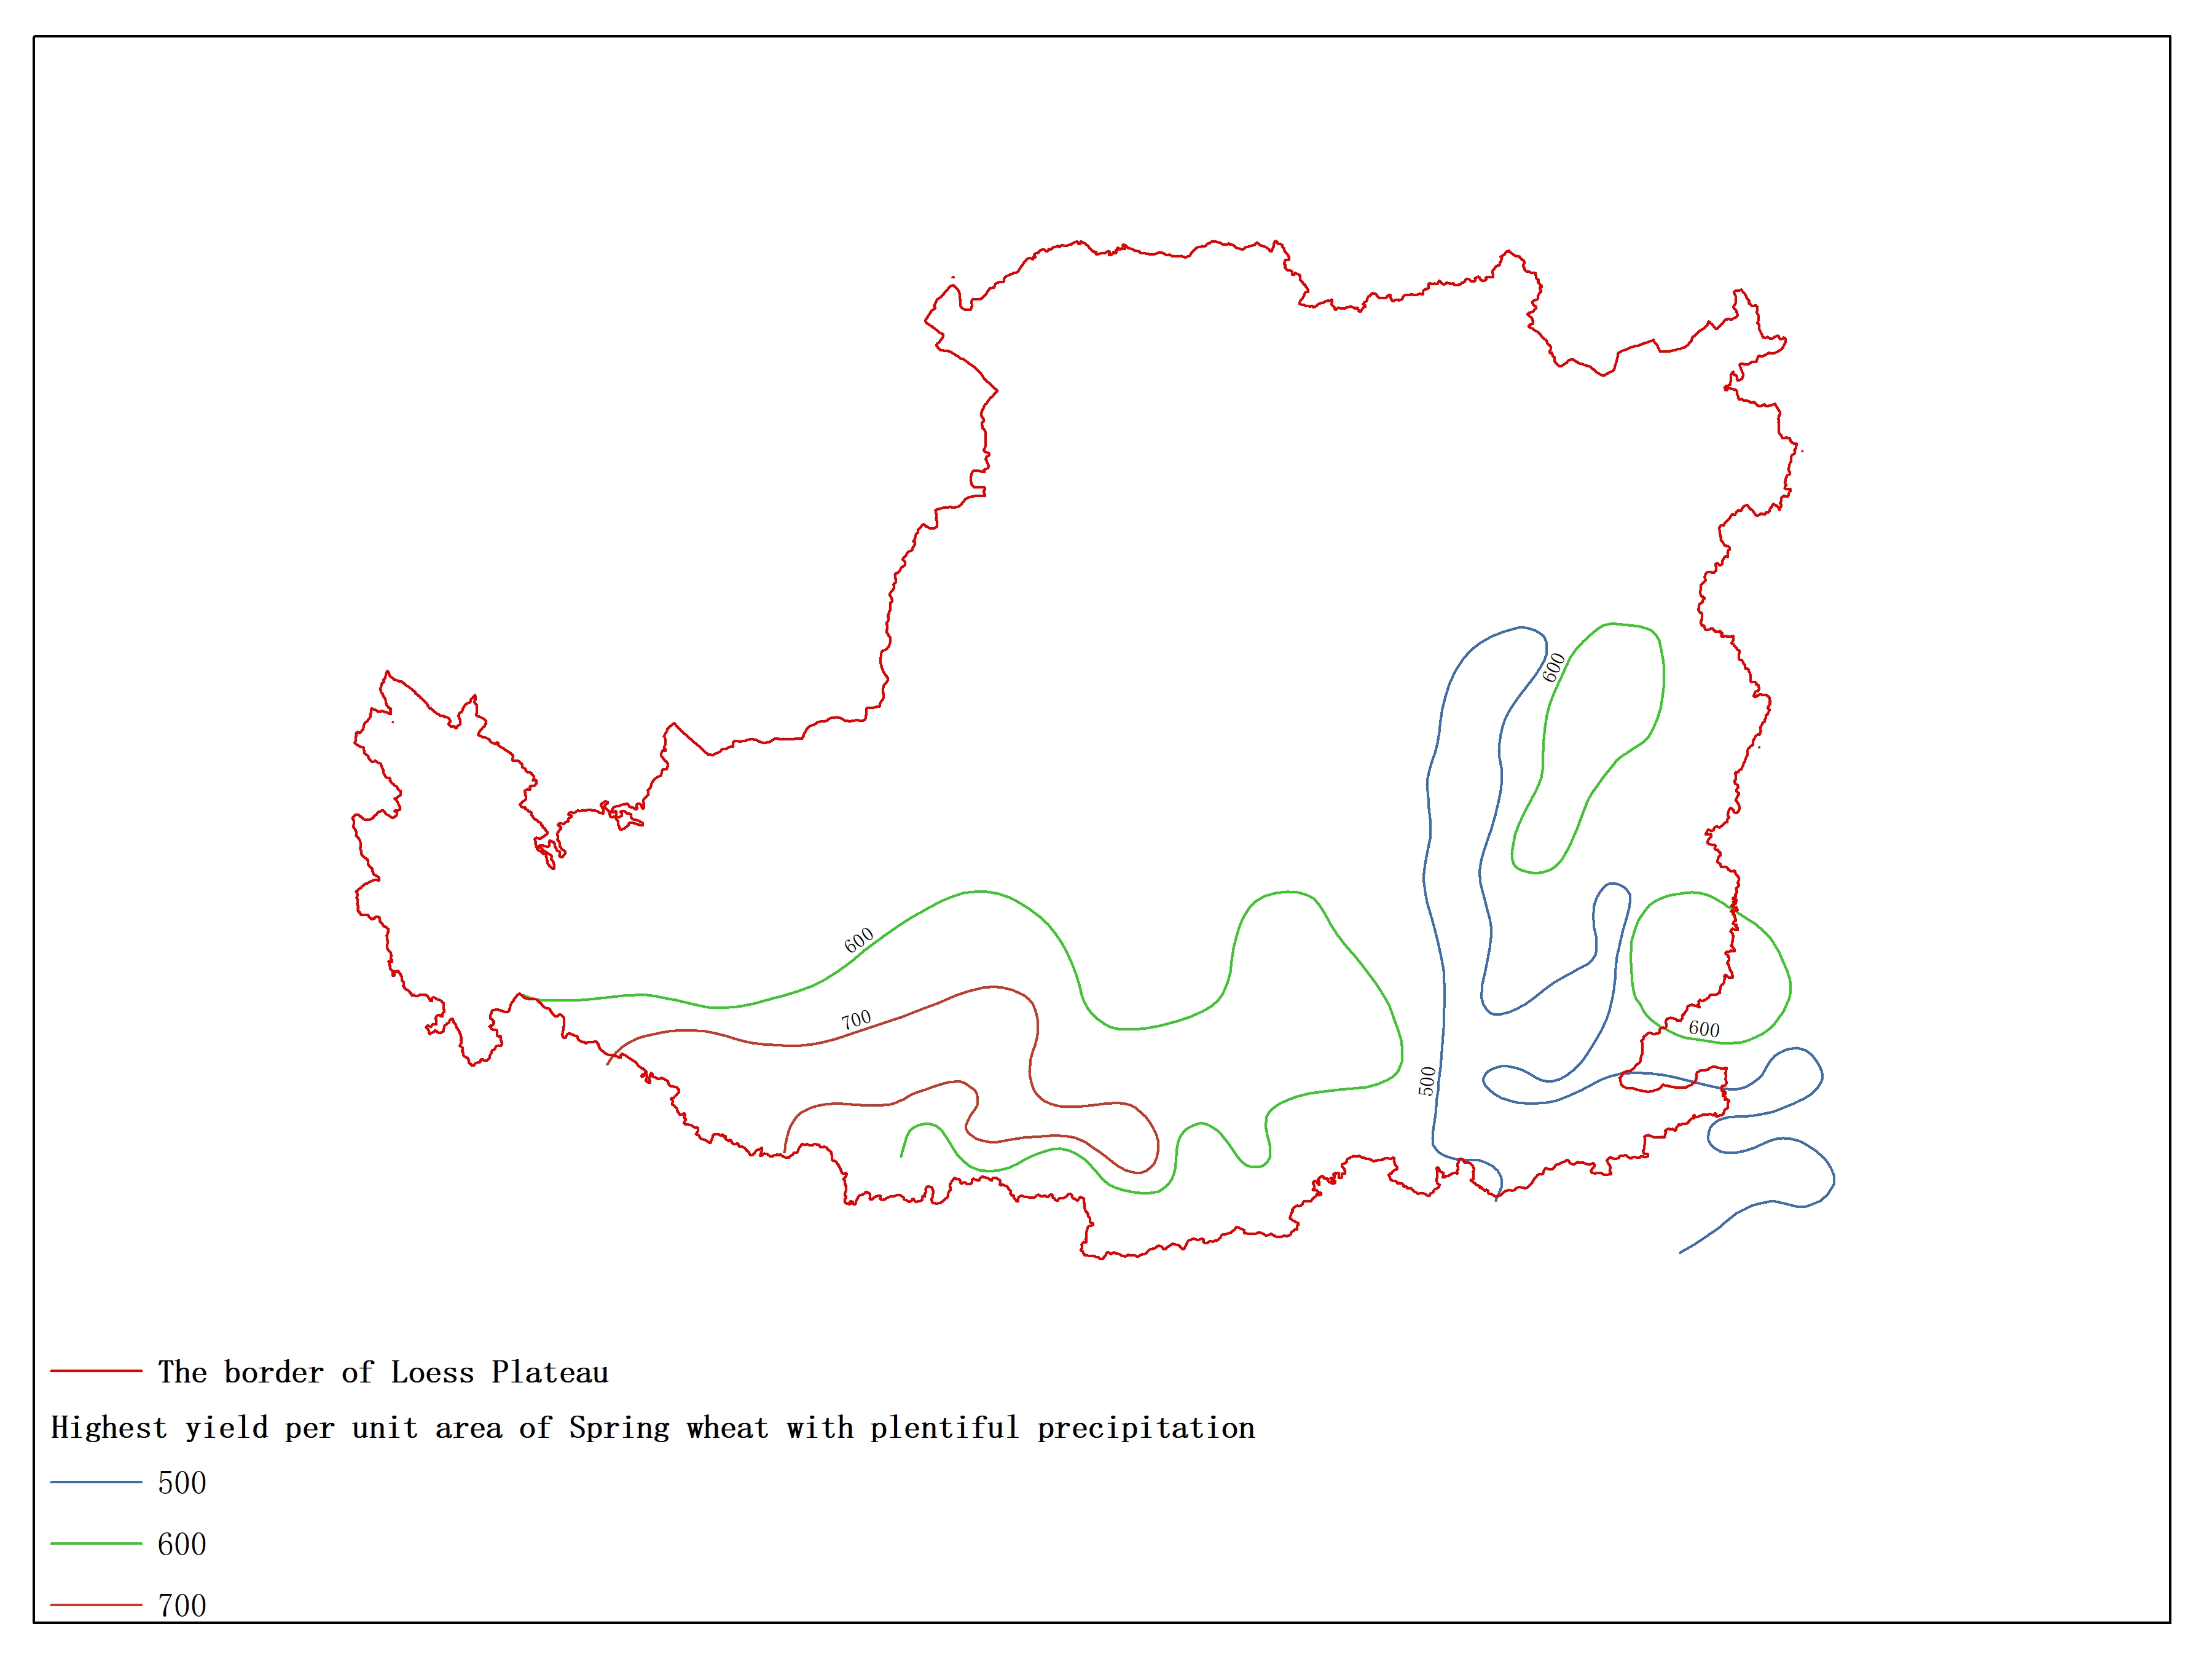 Agricultural climate resource atlas of Loess Plateau-Highest yield per unit area of Spring wheat with plentiful precipitation